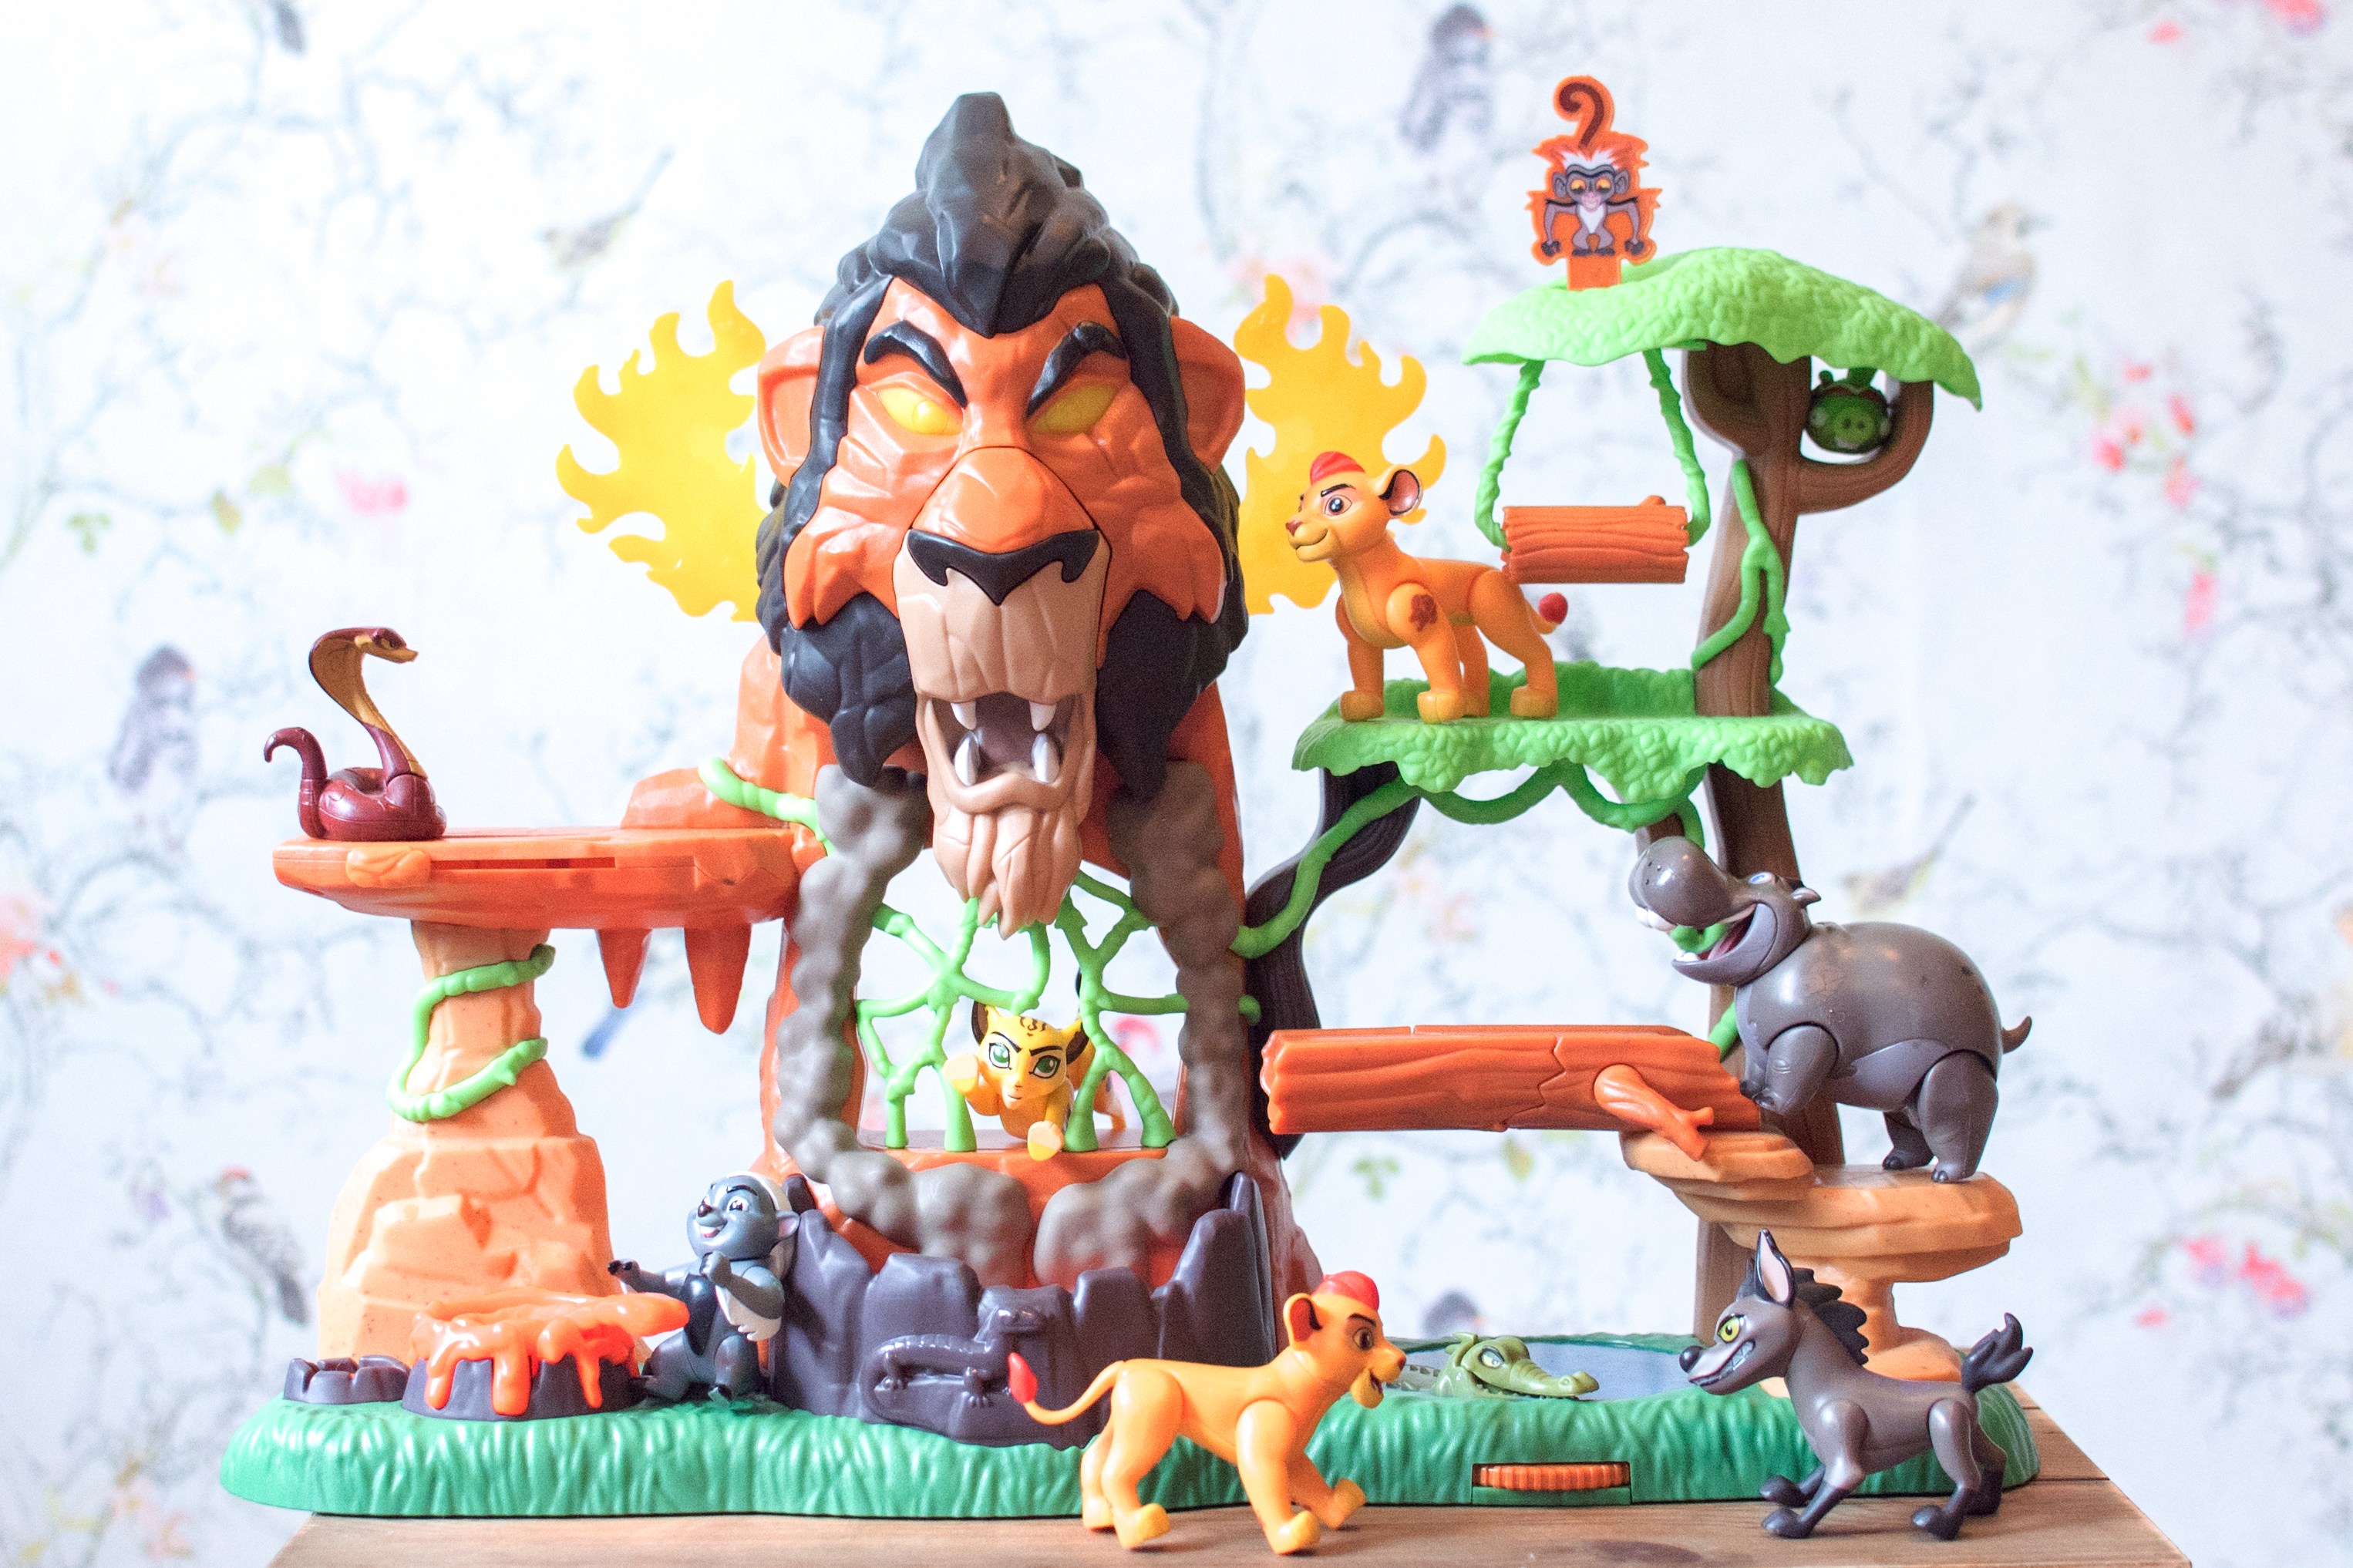 the rise of scar playset